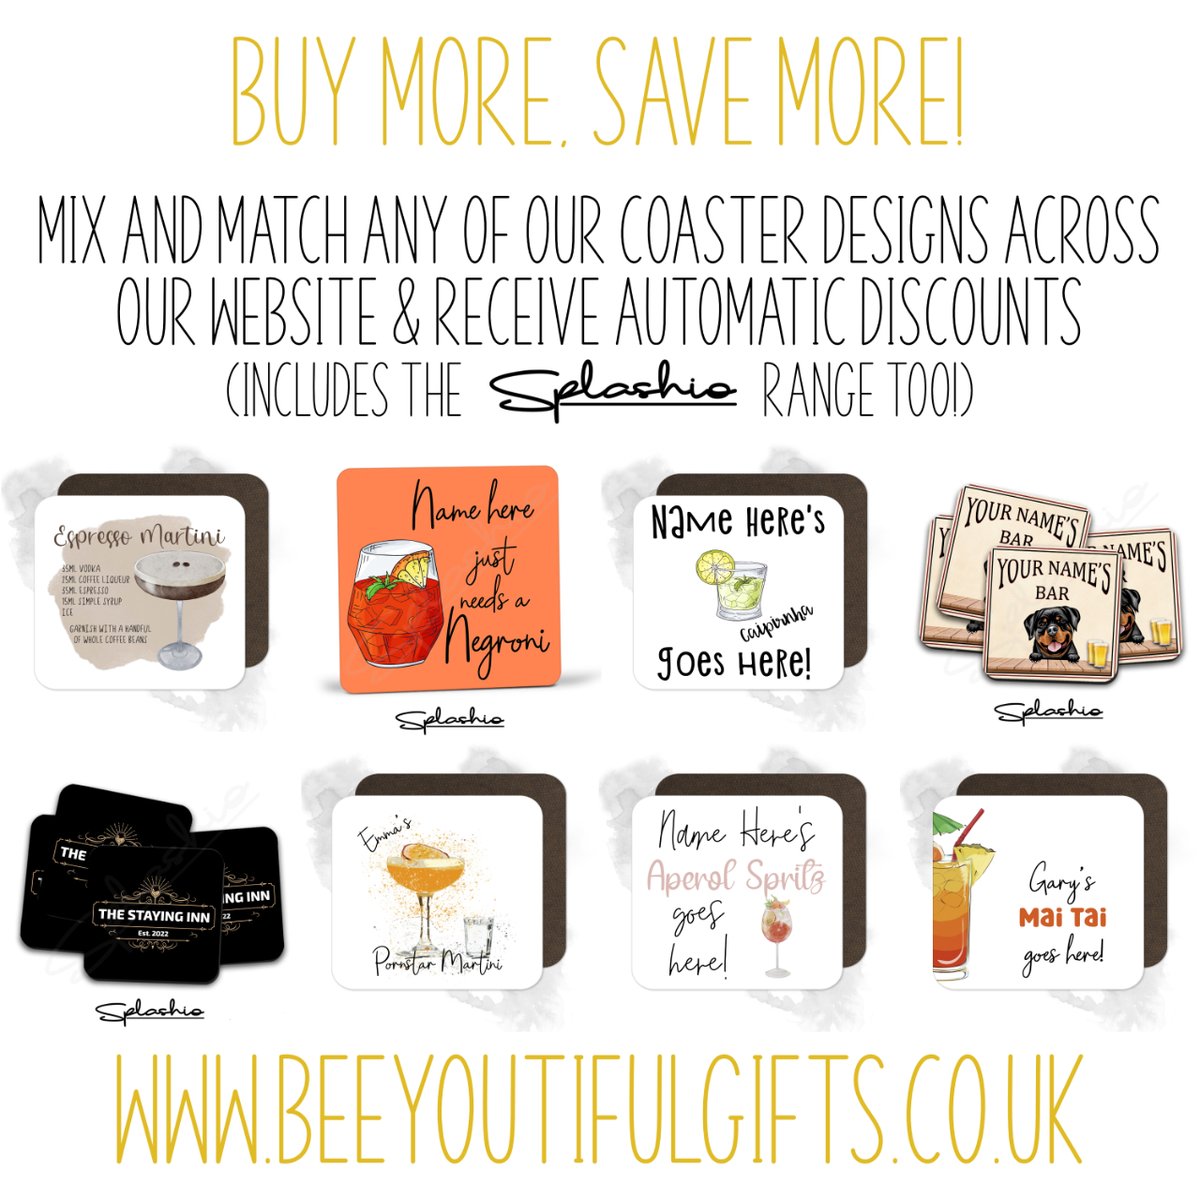 Mix & Match any of our coasters across our website to create your perfect gifts for friends & family. Receive automatic discounts at the checkout. Ideal for a gift alongside a bottle! 😊 #PersonalisedGift #PersonalisedCoasters #SmallGift #SmallGiftIdeas #BeeyoutifulGifts